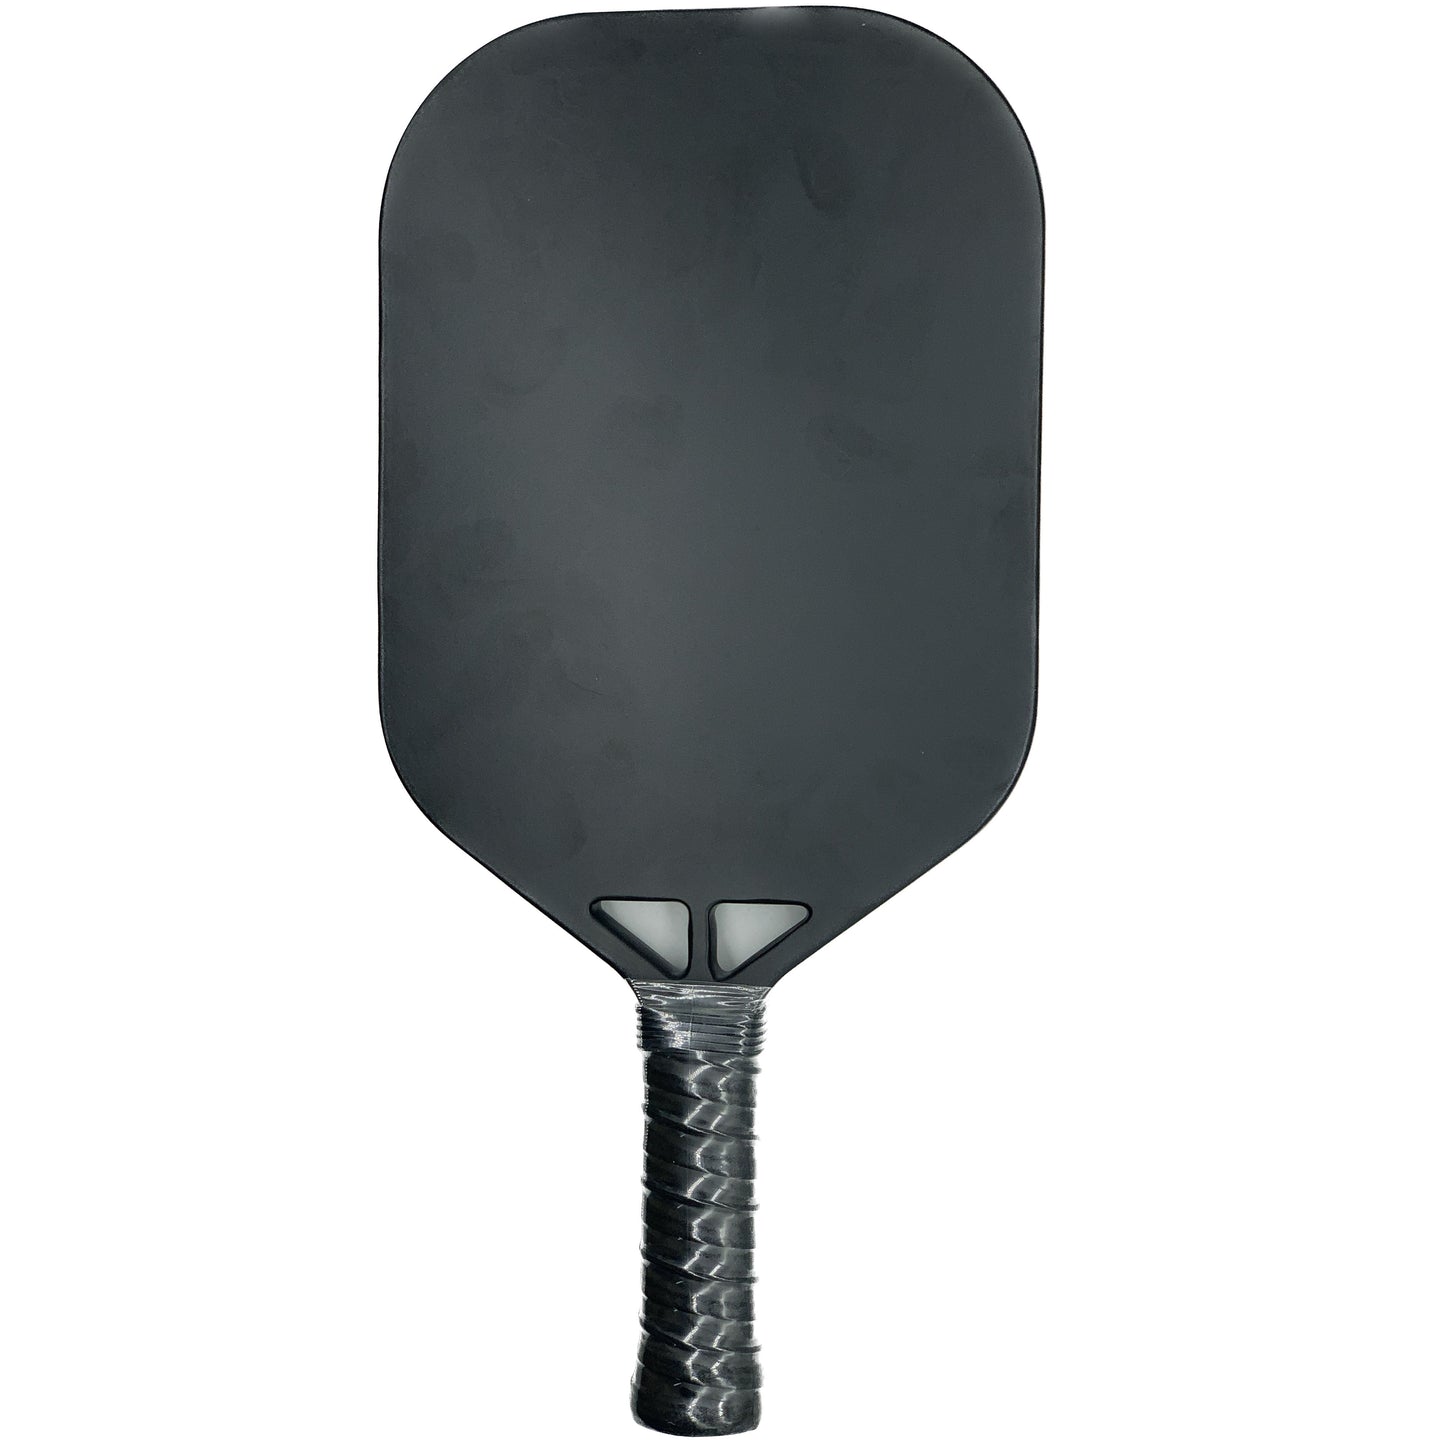 New Design Outdoor Pickleball Paddle Usapa Approved Carbon Fiber Pickleball Paddle